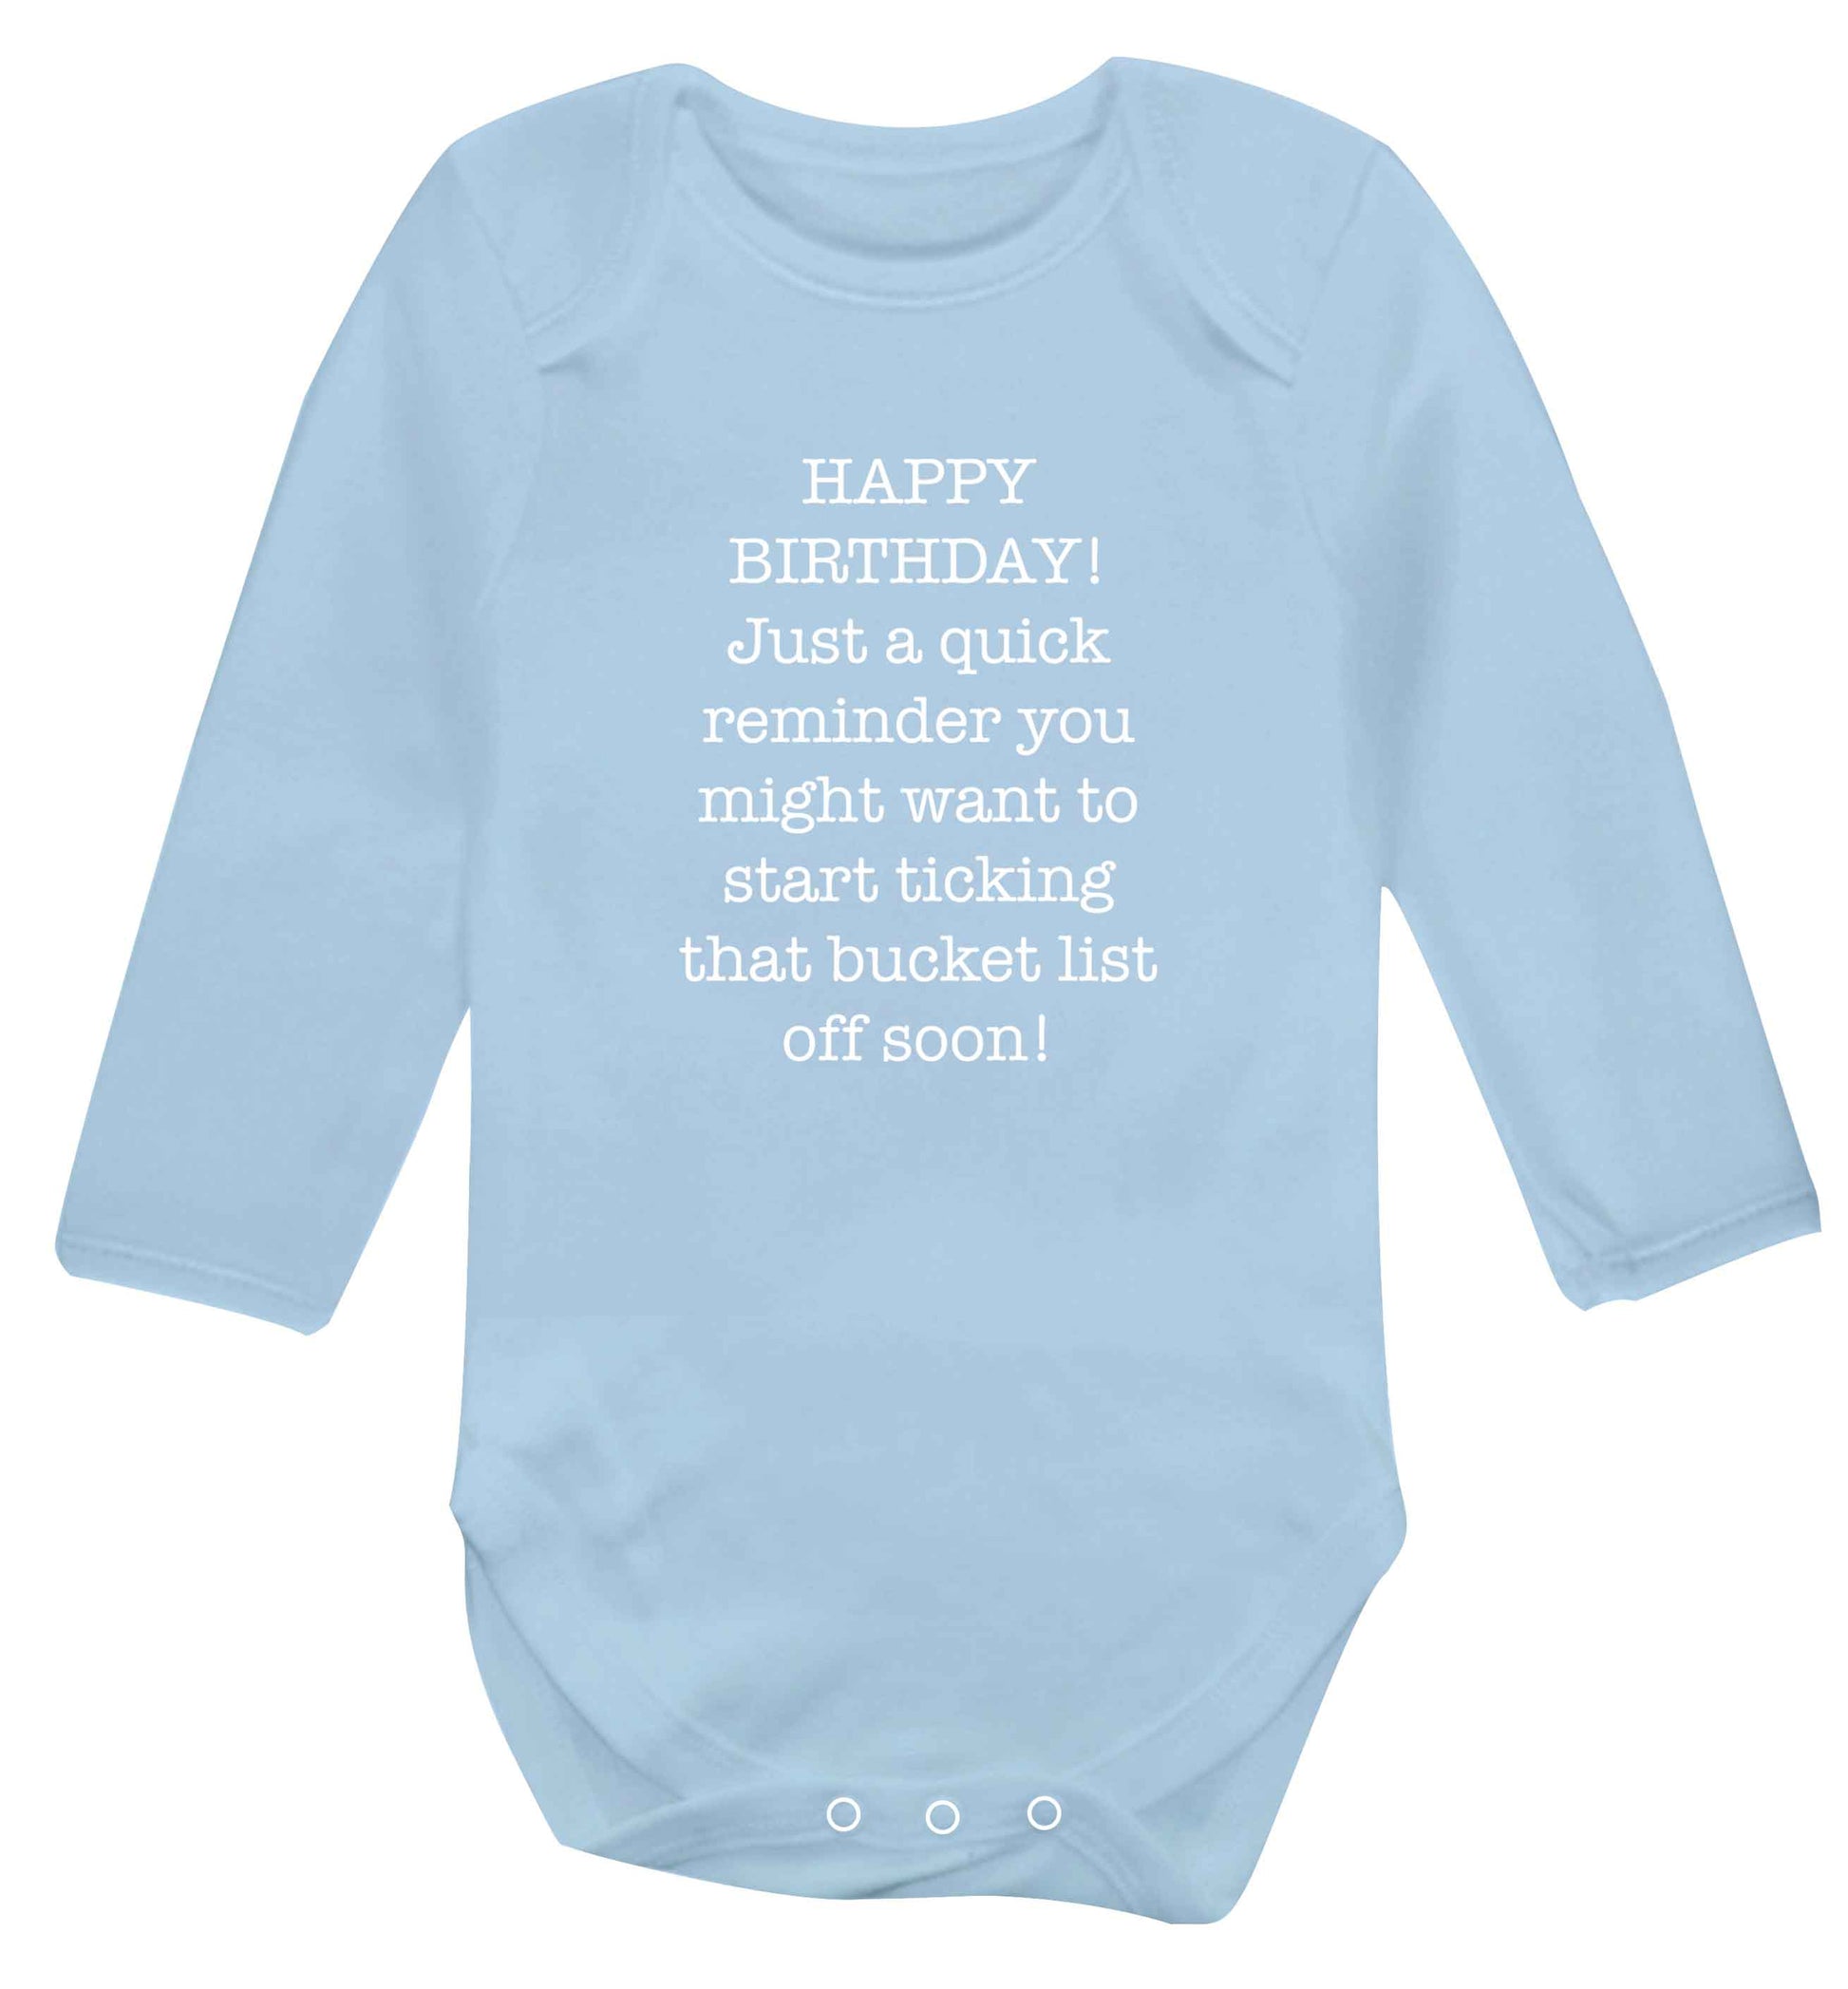 Happy birthday, just a quick reminder you might want to start ticking that bucket list off soon baby vest long sleeved pale blue 6-12 months